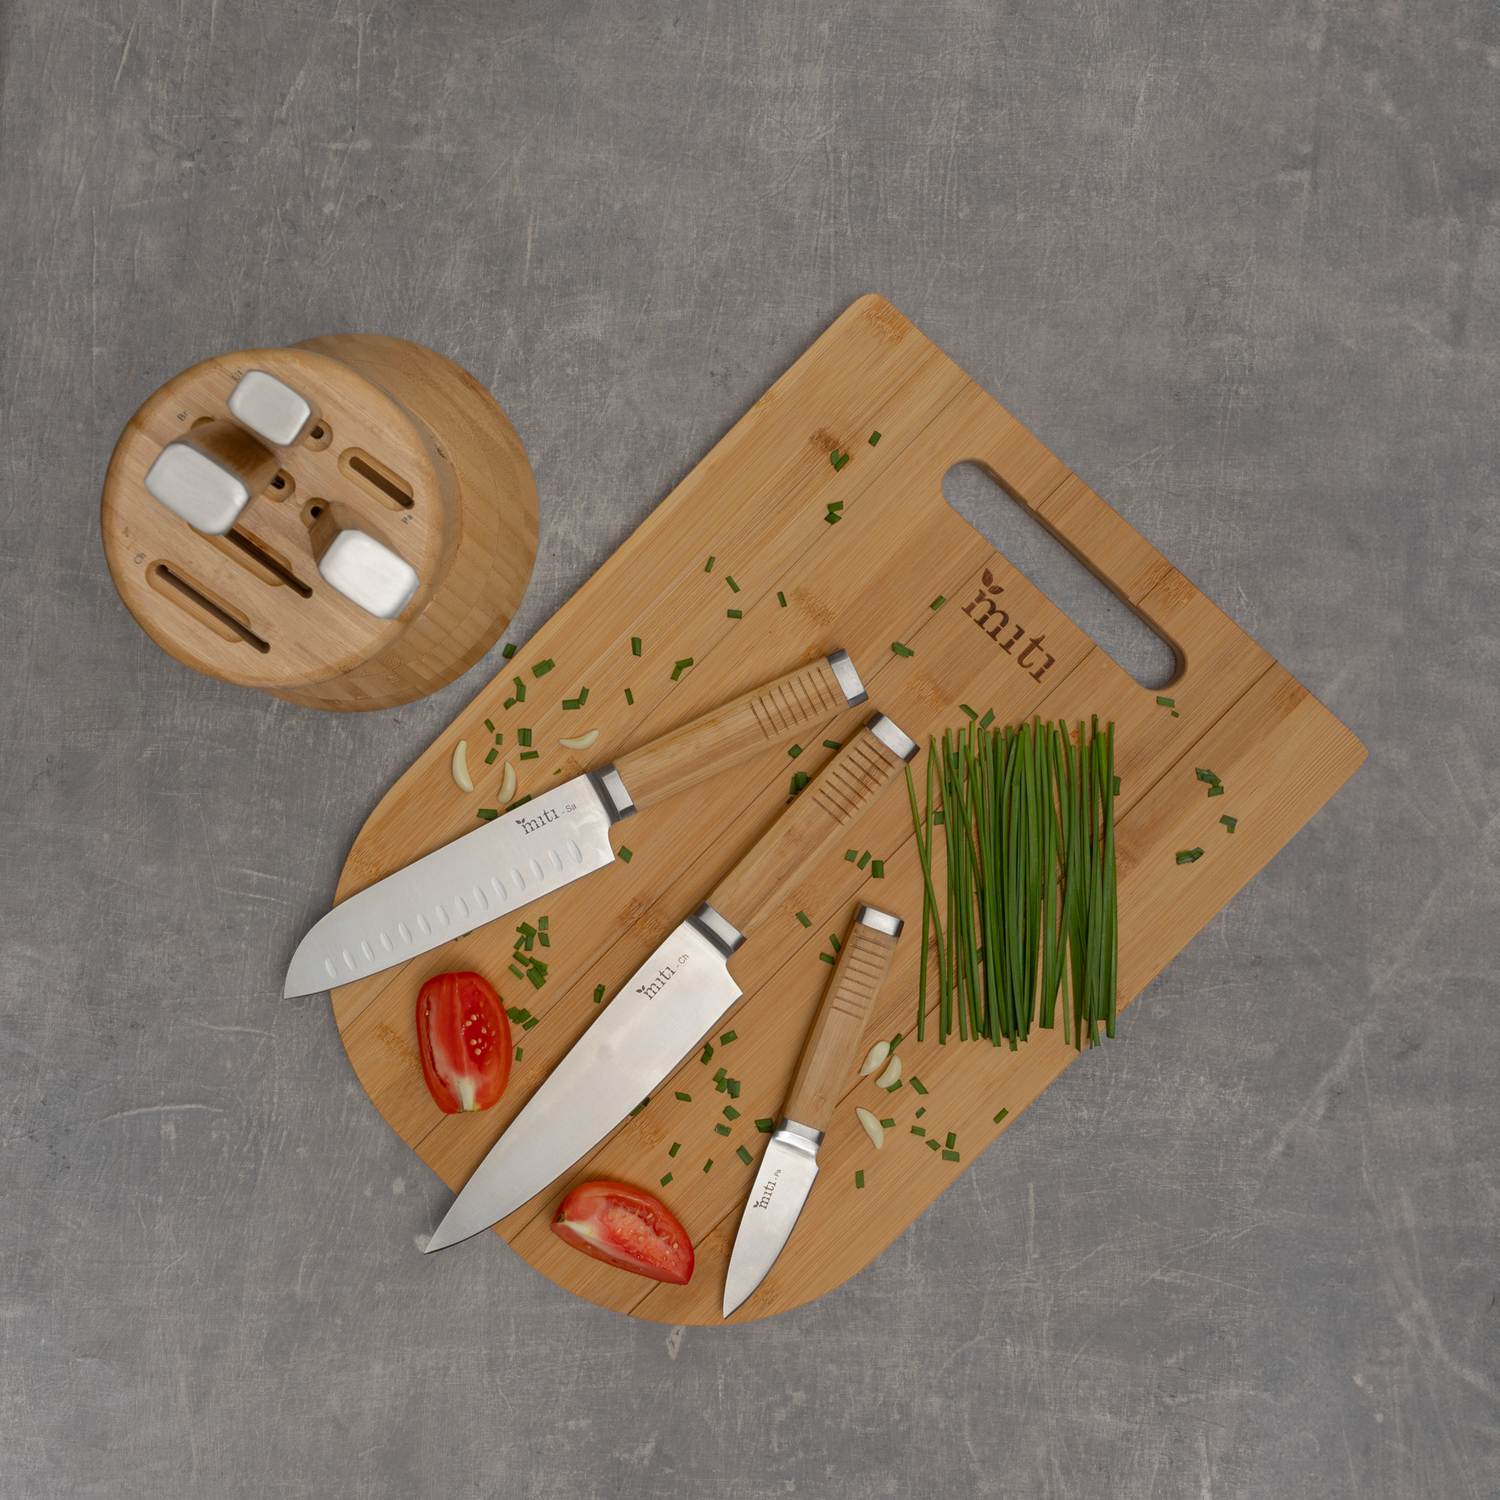 Photo of MITI Life Knife set with the bamboo cutting board